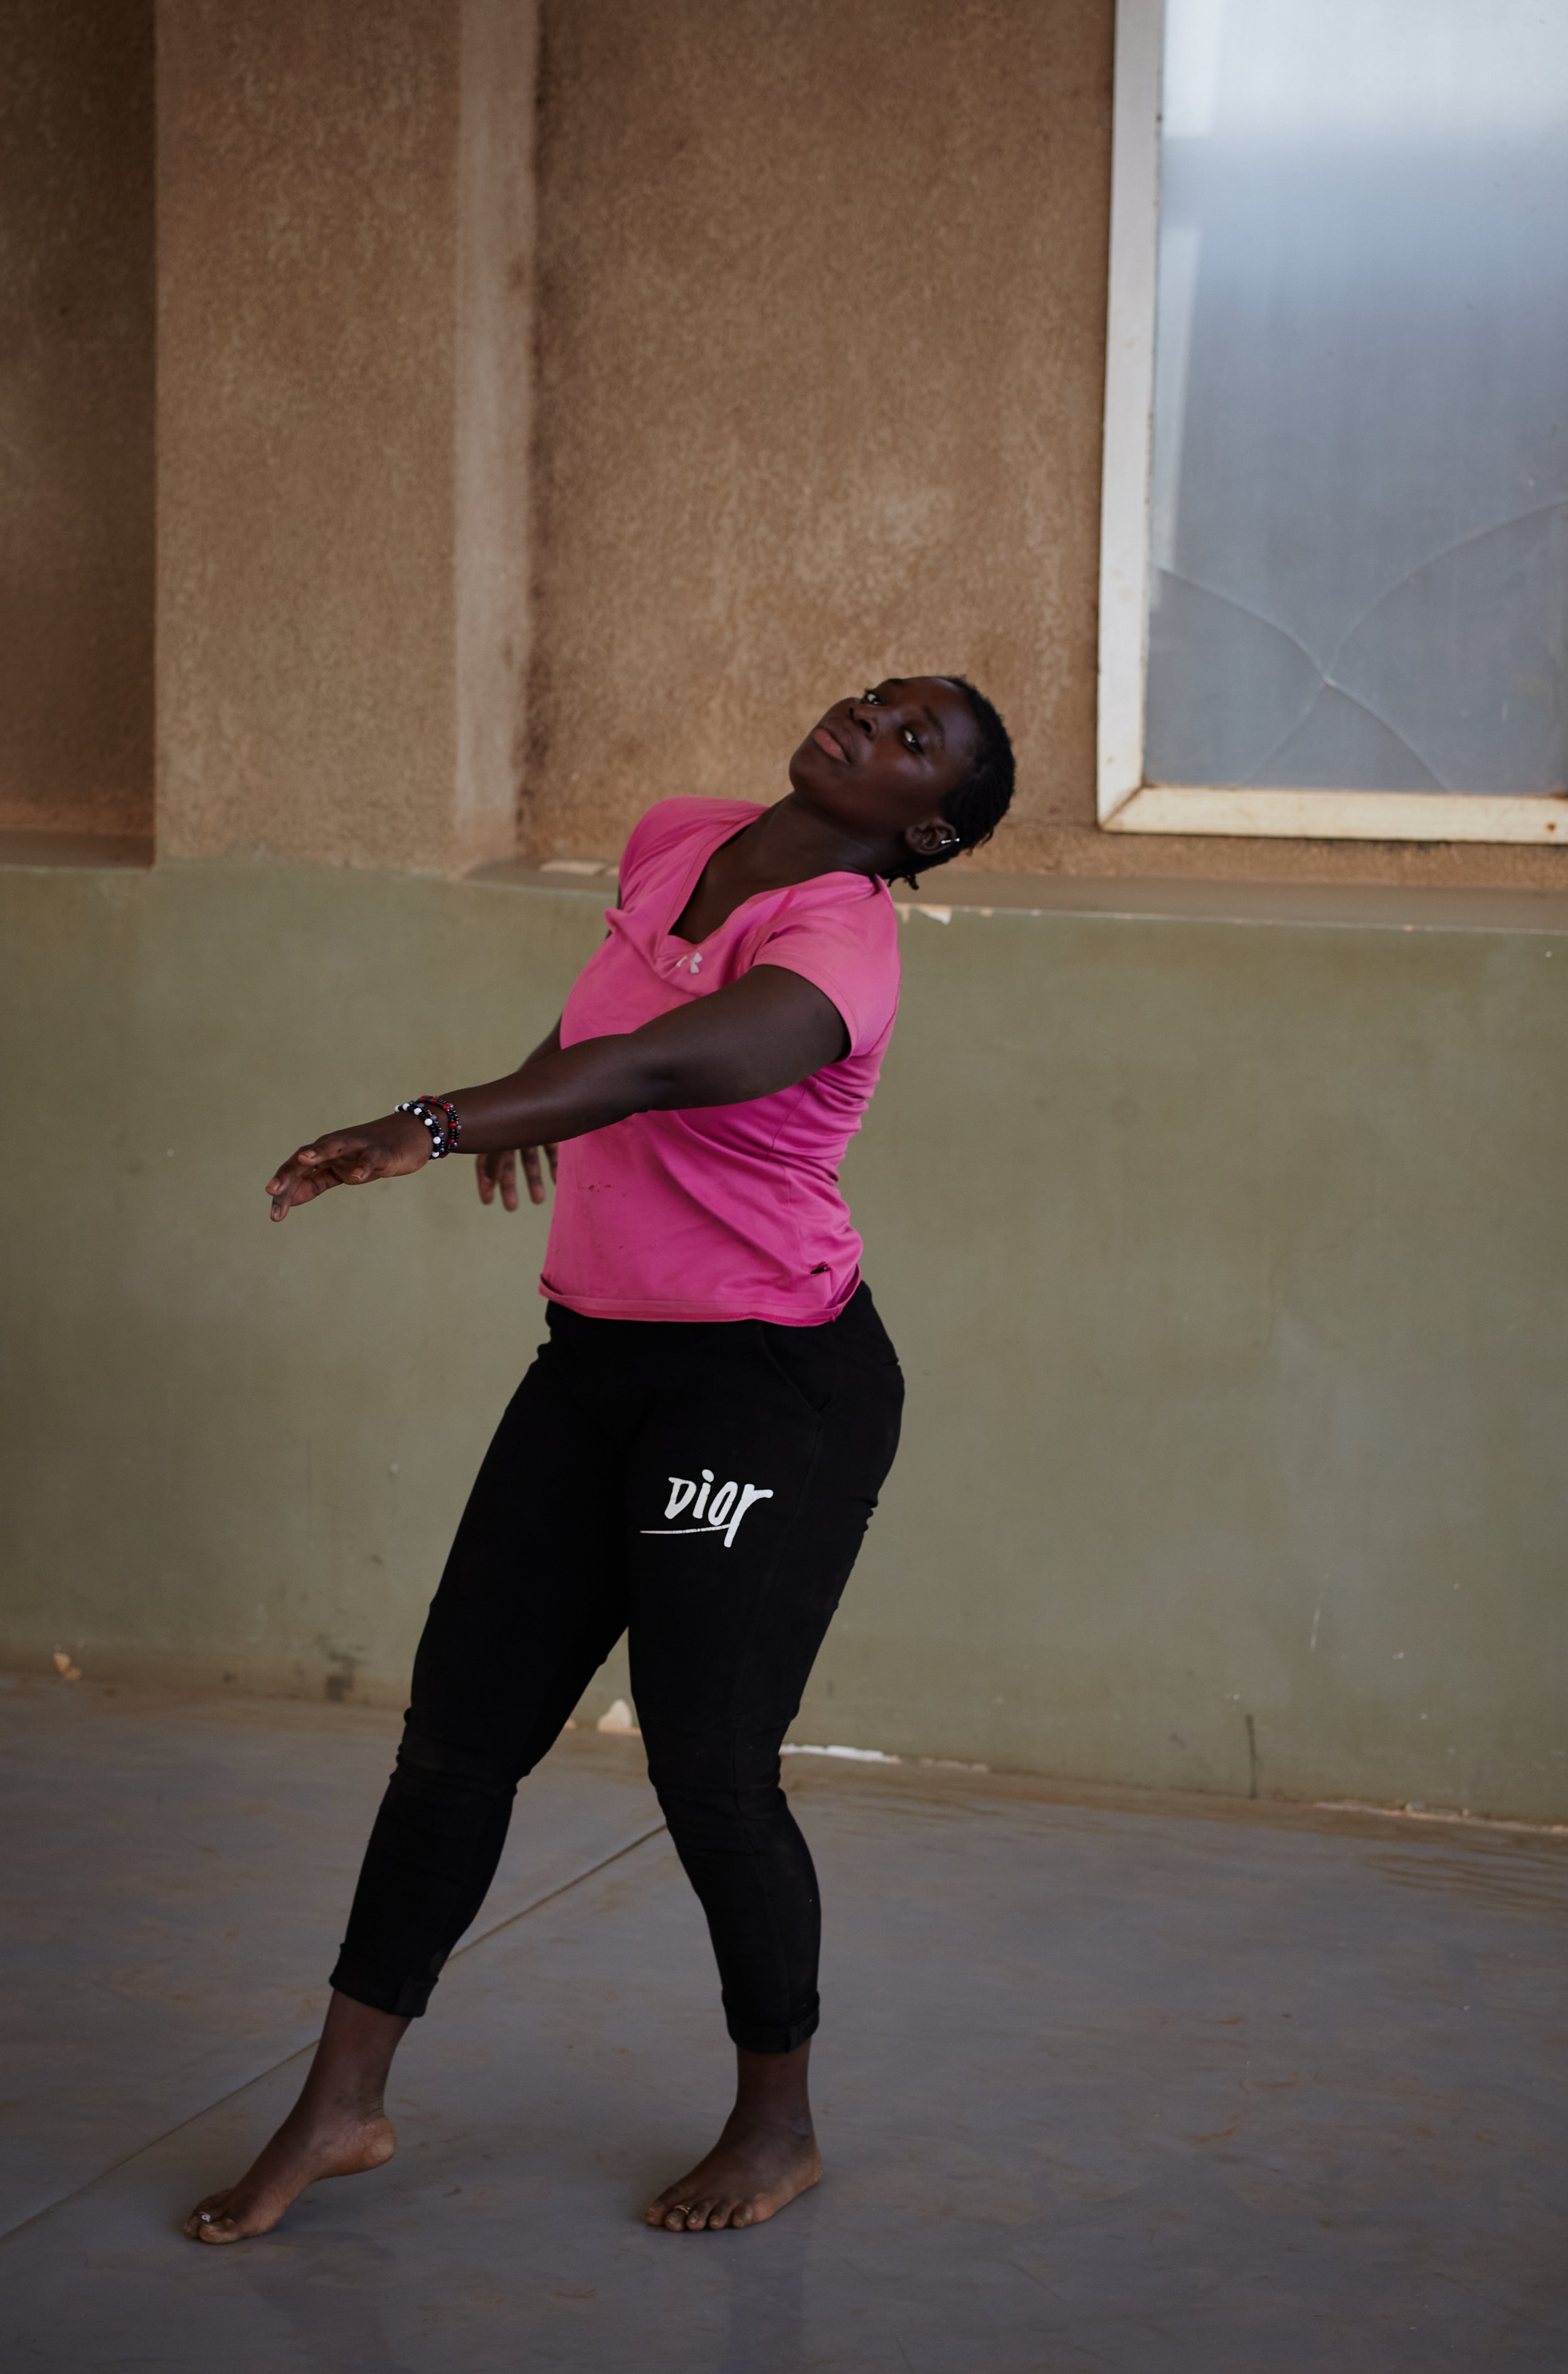 Photograph by Hatty Frances Bell of a girl in a pink t-shirt dancing in the studio at Ecoles Des Sables